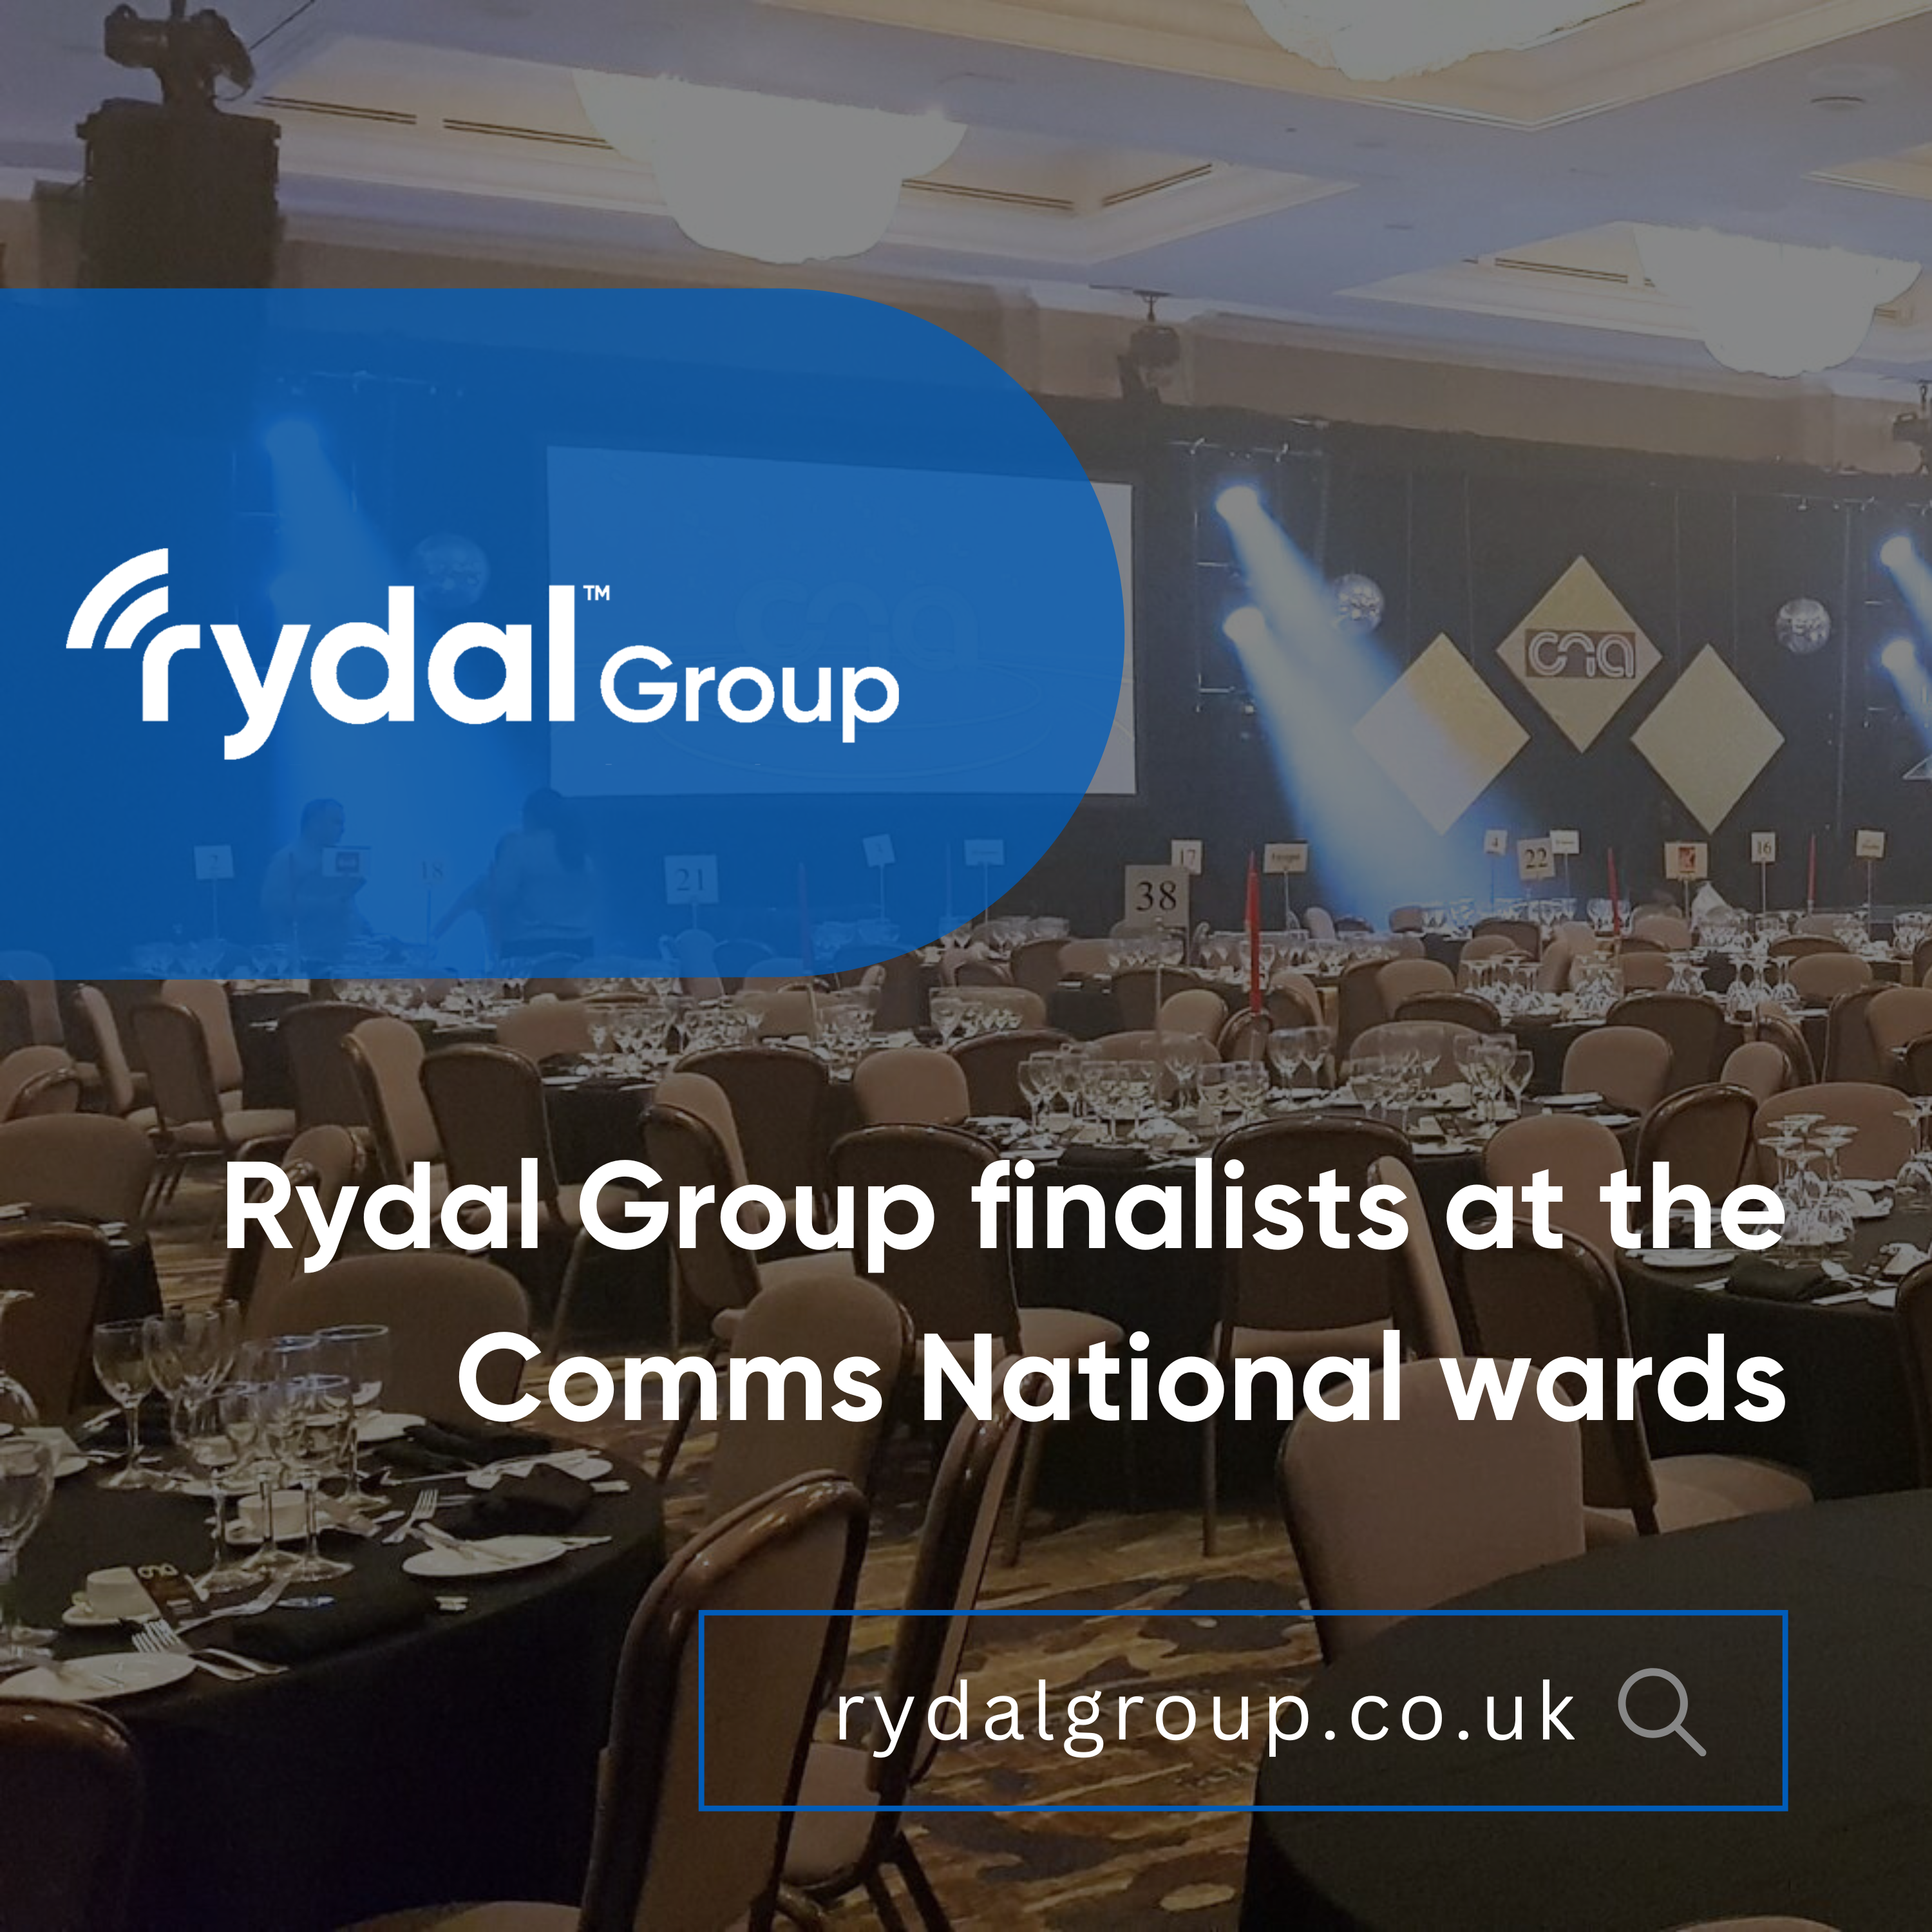 Rydal Group are finalists for Customer Service Award